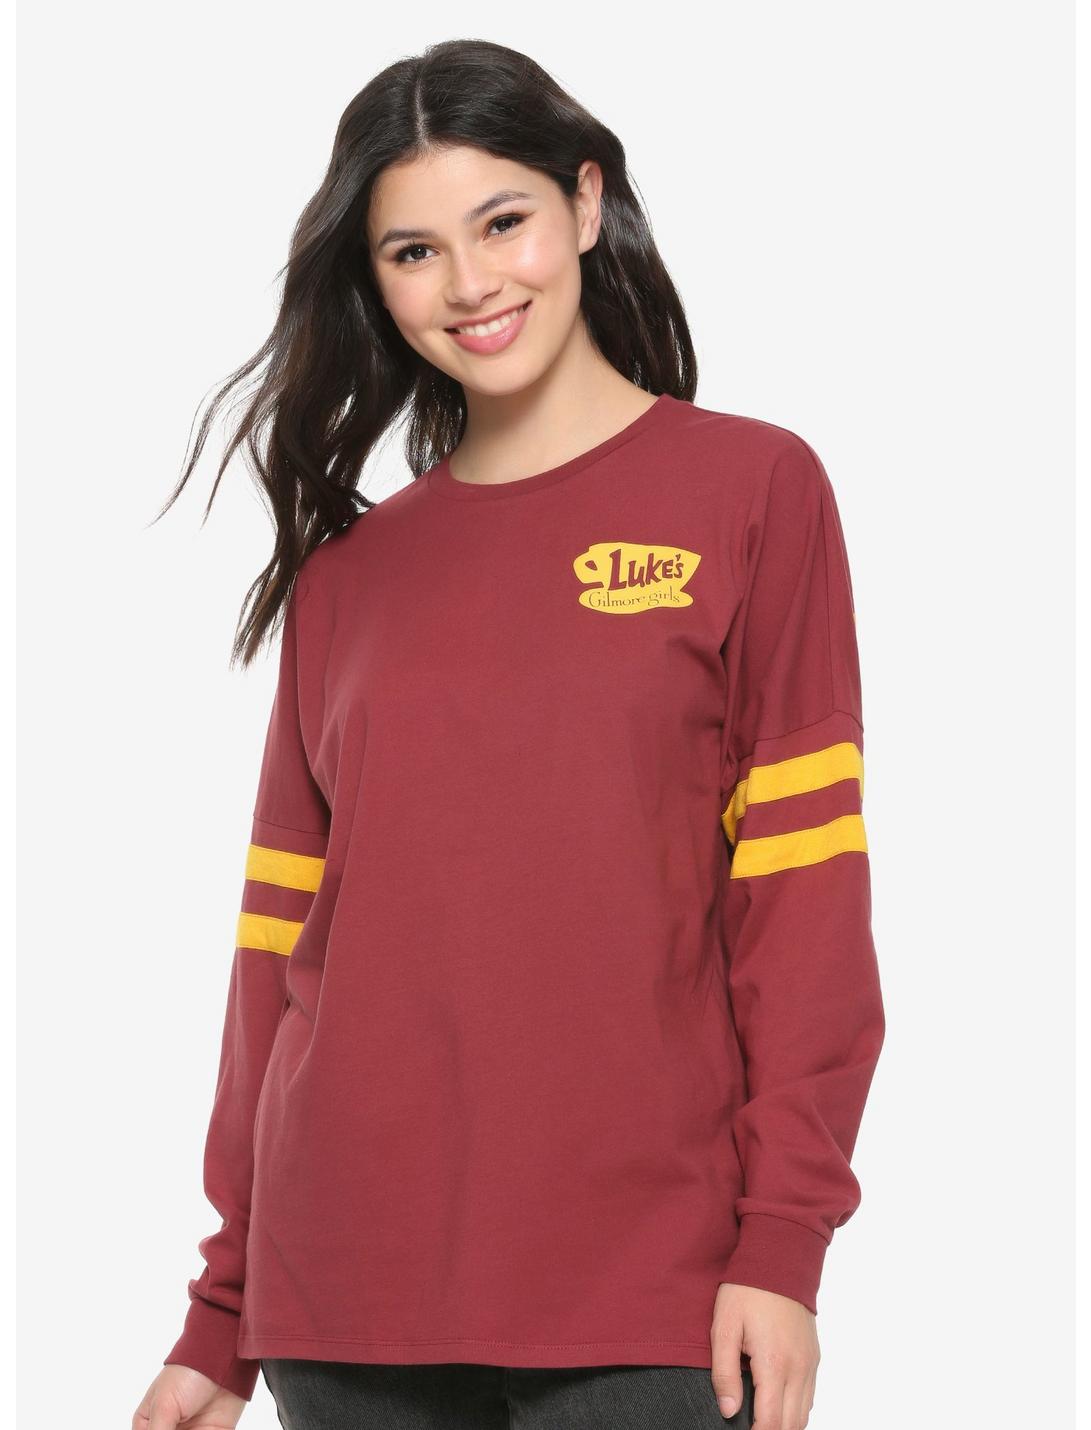 Gilmore Girls Luke's Diner Hype Jersey - BoxLunch Exclusive, RED, hi-res